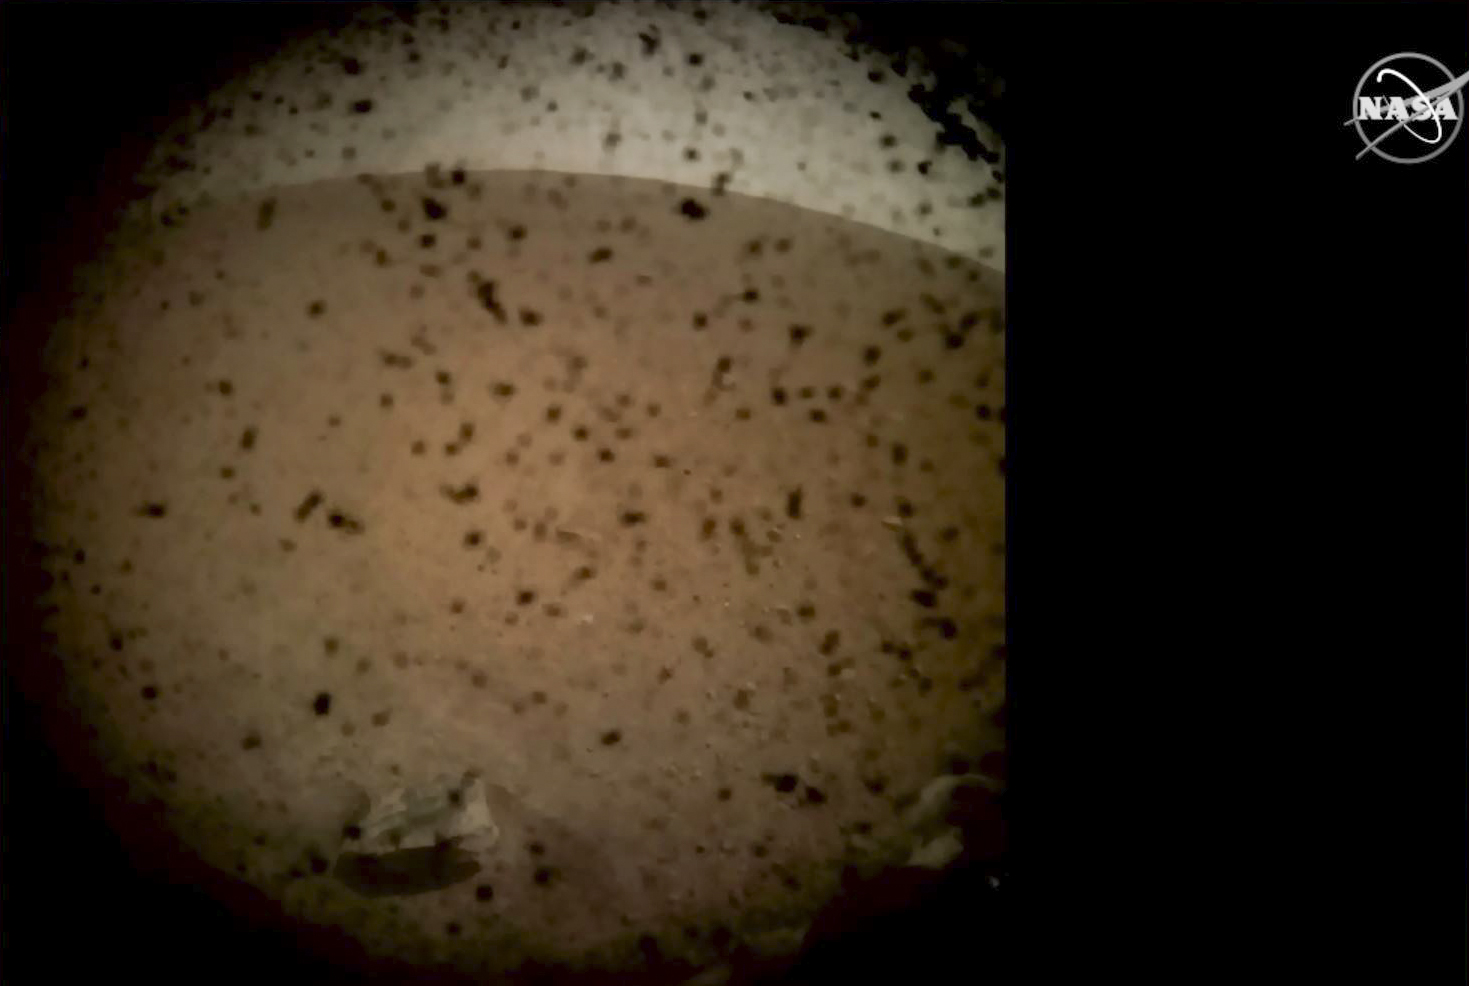 PHOTO: In this frame grab taken from NASA TV on Nov. 26, 2018, debris is seen on the lens in the first image from NASA's InSight lander after it touched down on the surface of Mars.